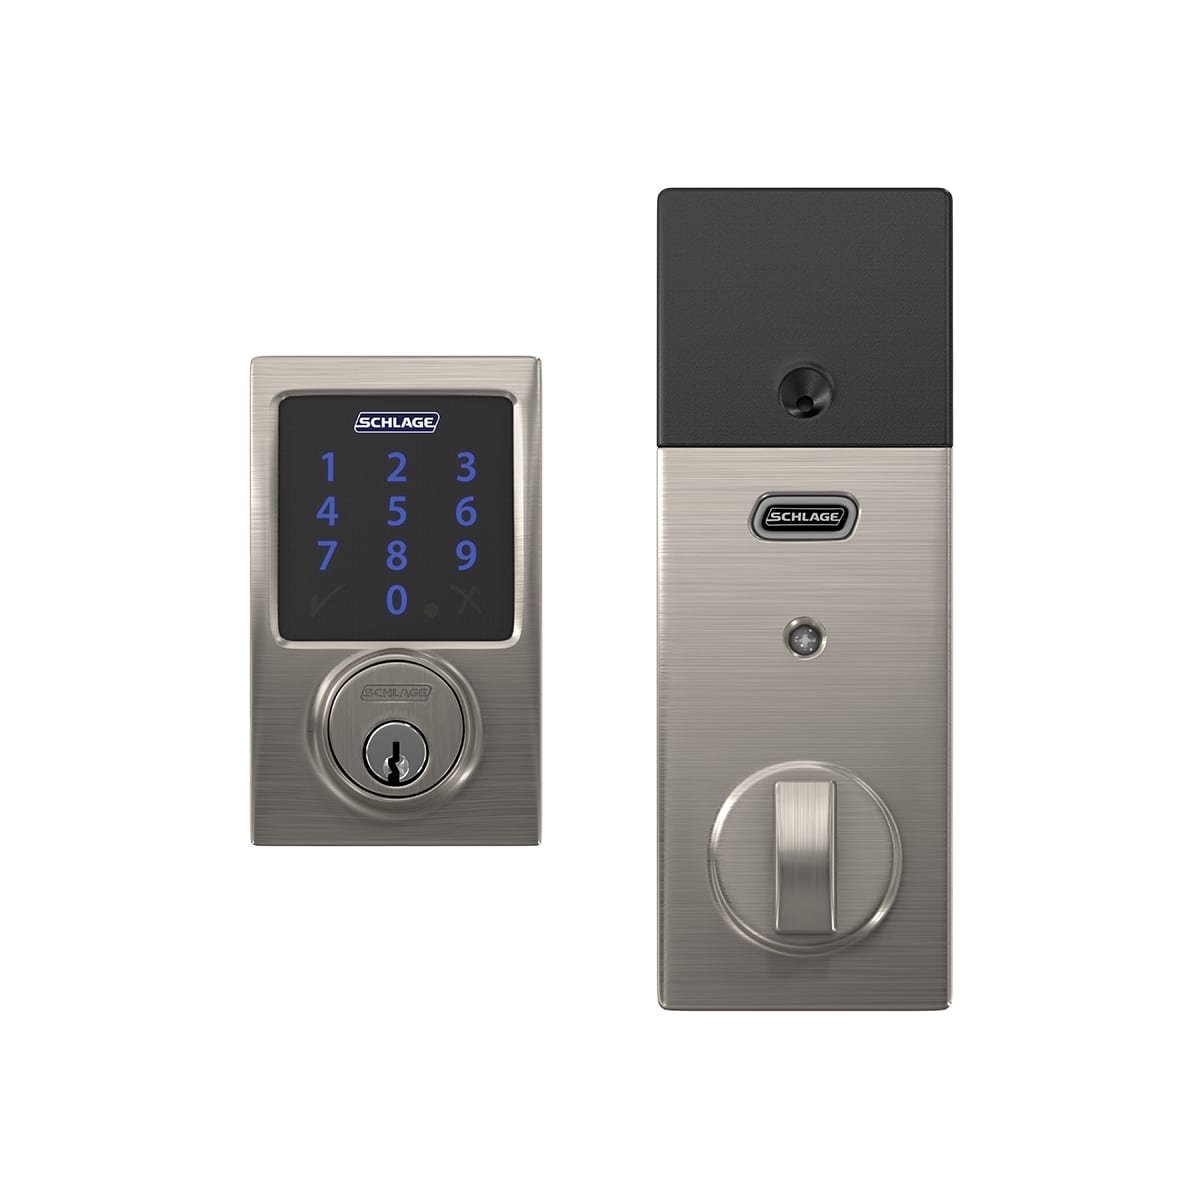 Schlage Connect lock product image